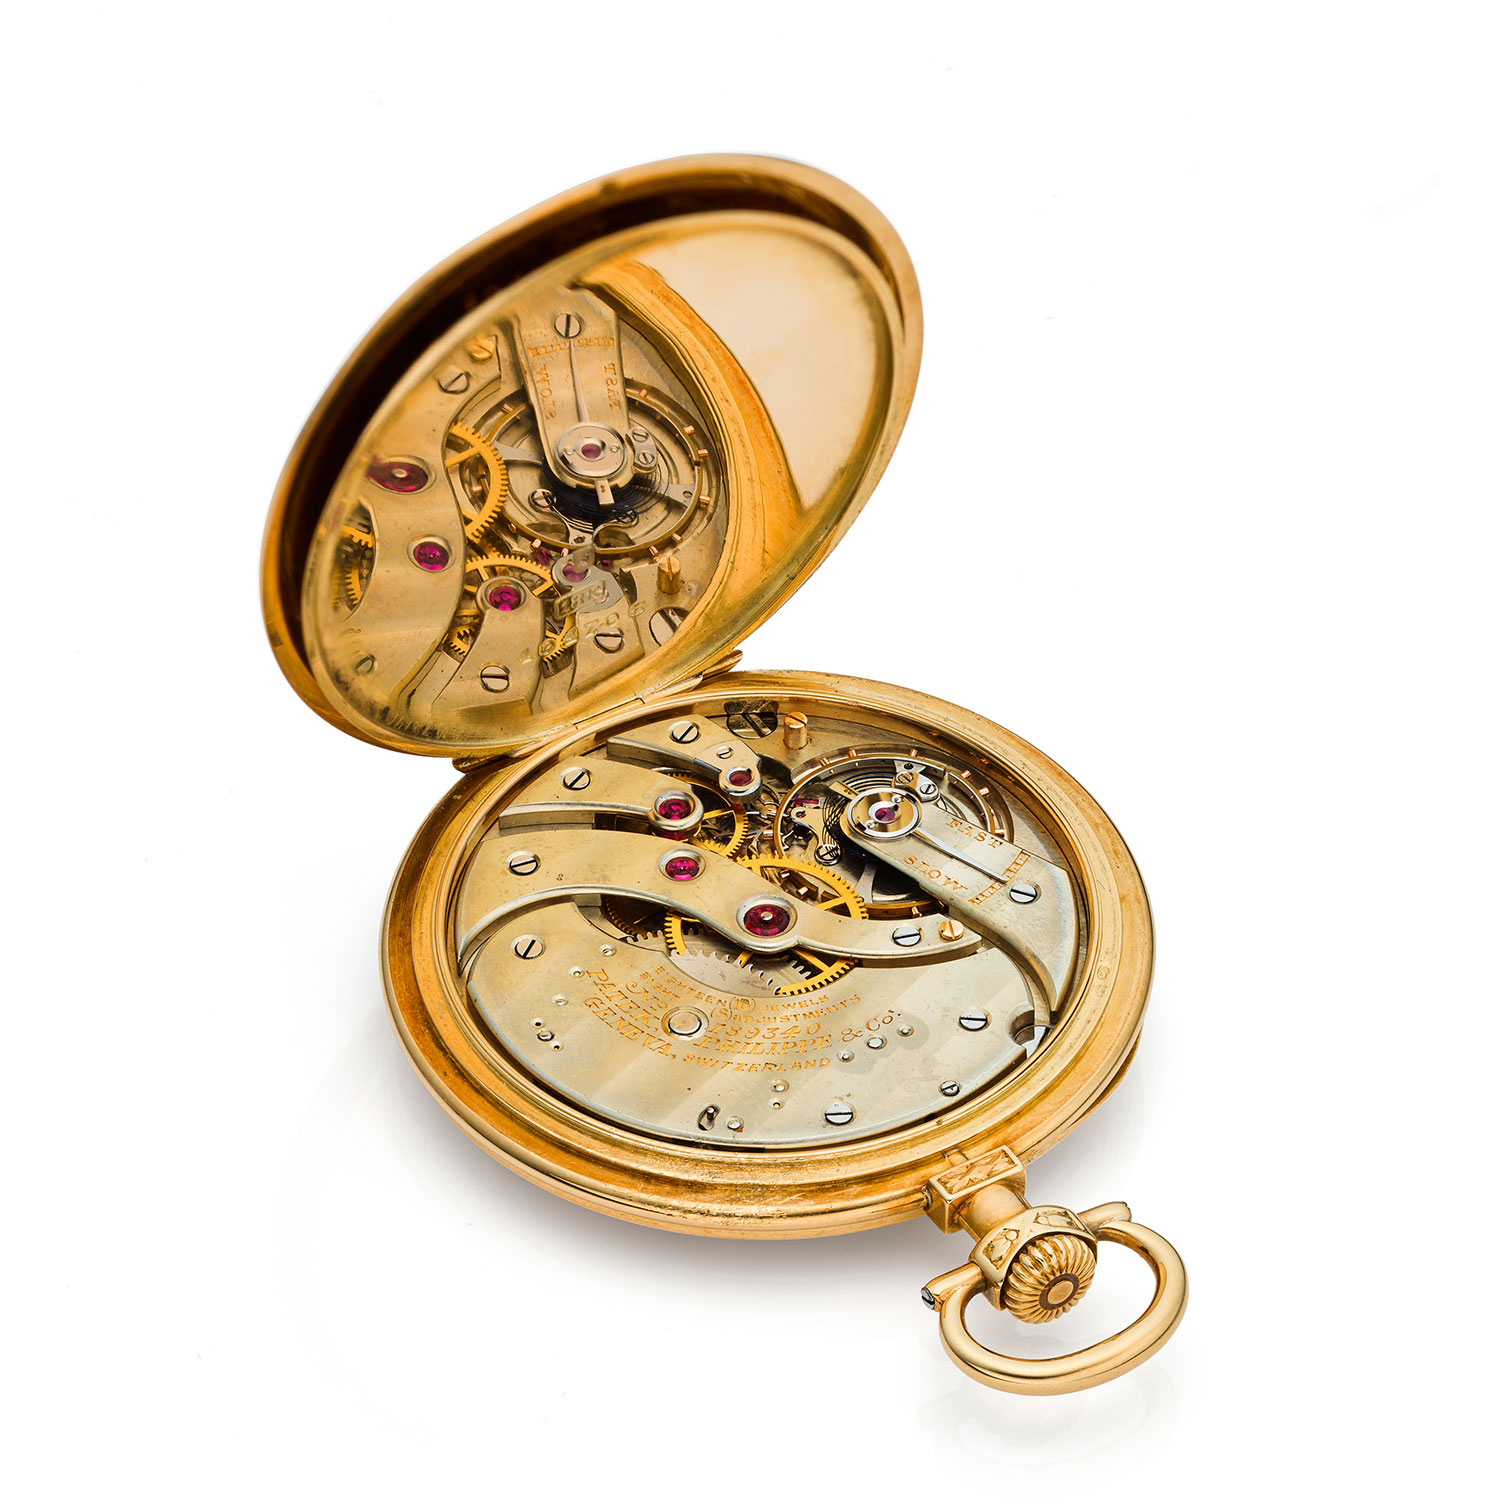 PATEK PHILIPPE POCKET WATCH RETAILED BY TIFFANY & CO. - Collectability